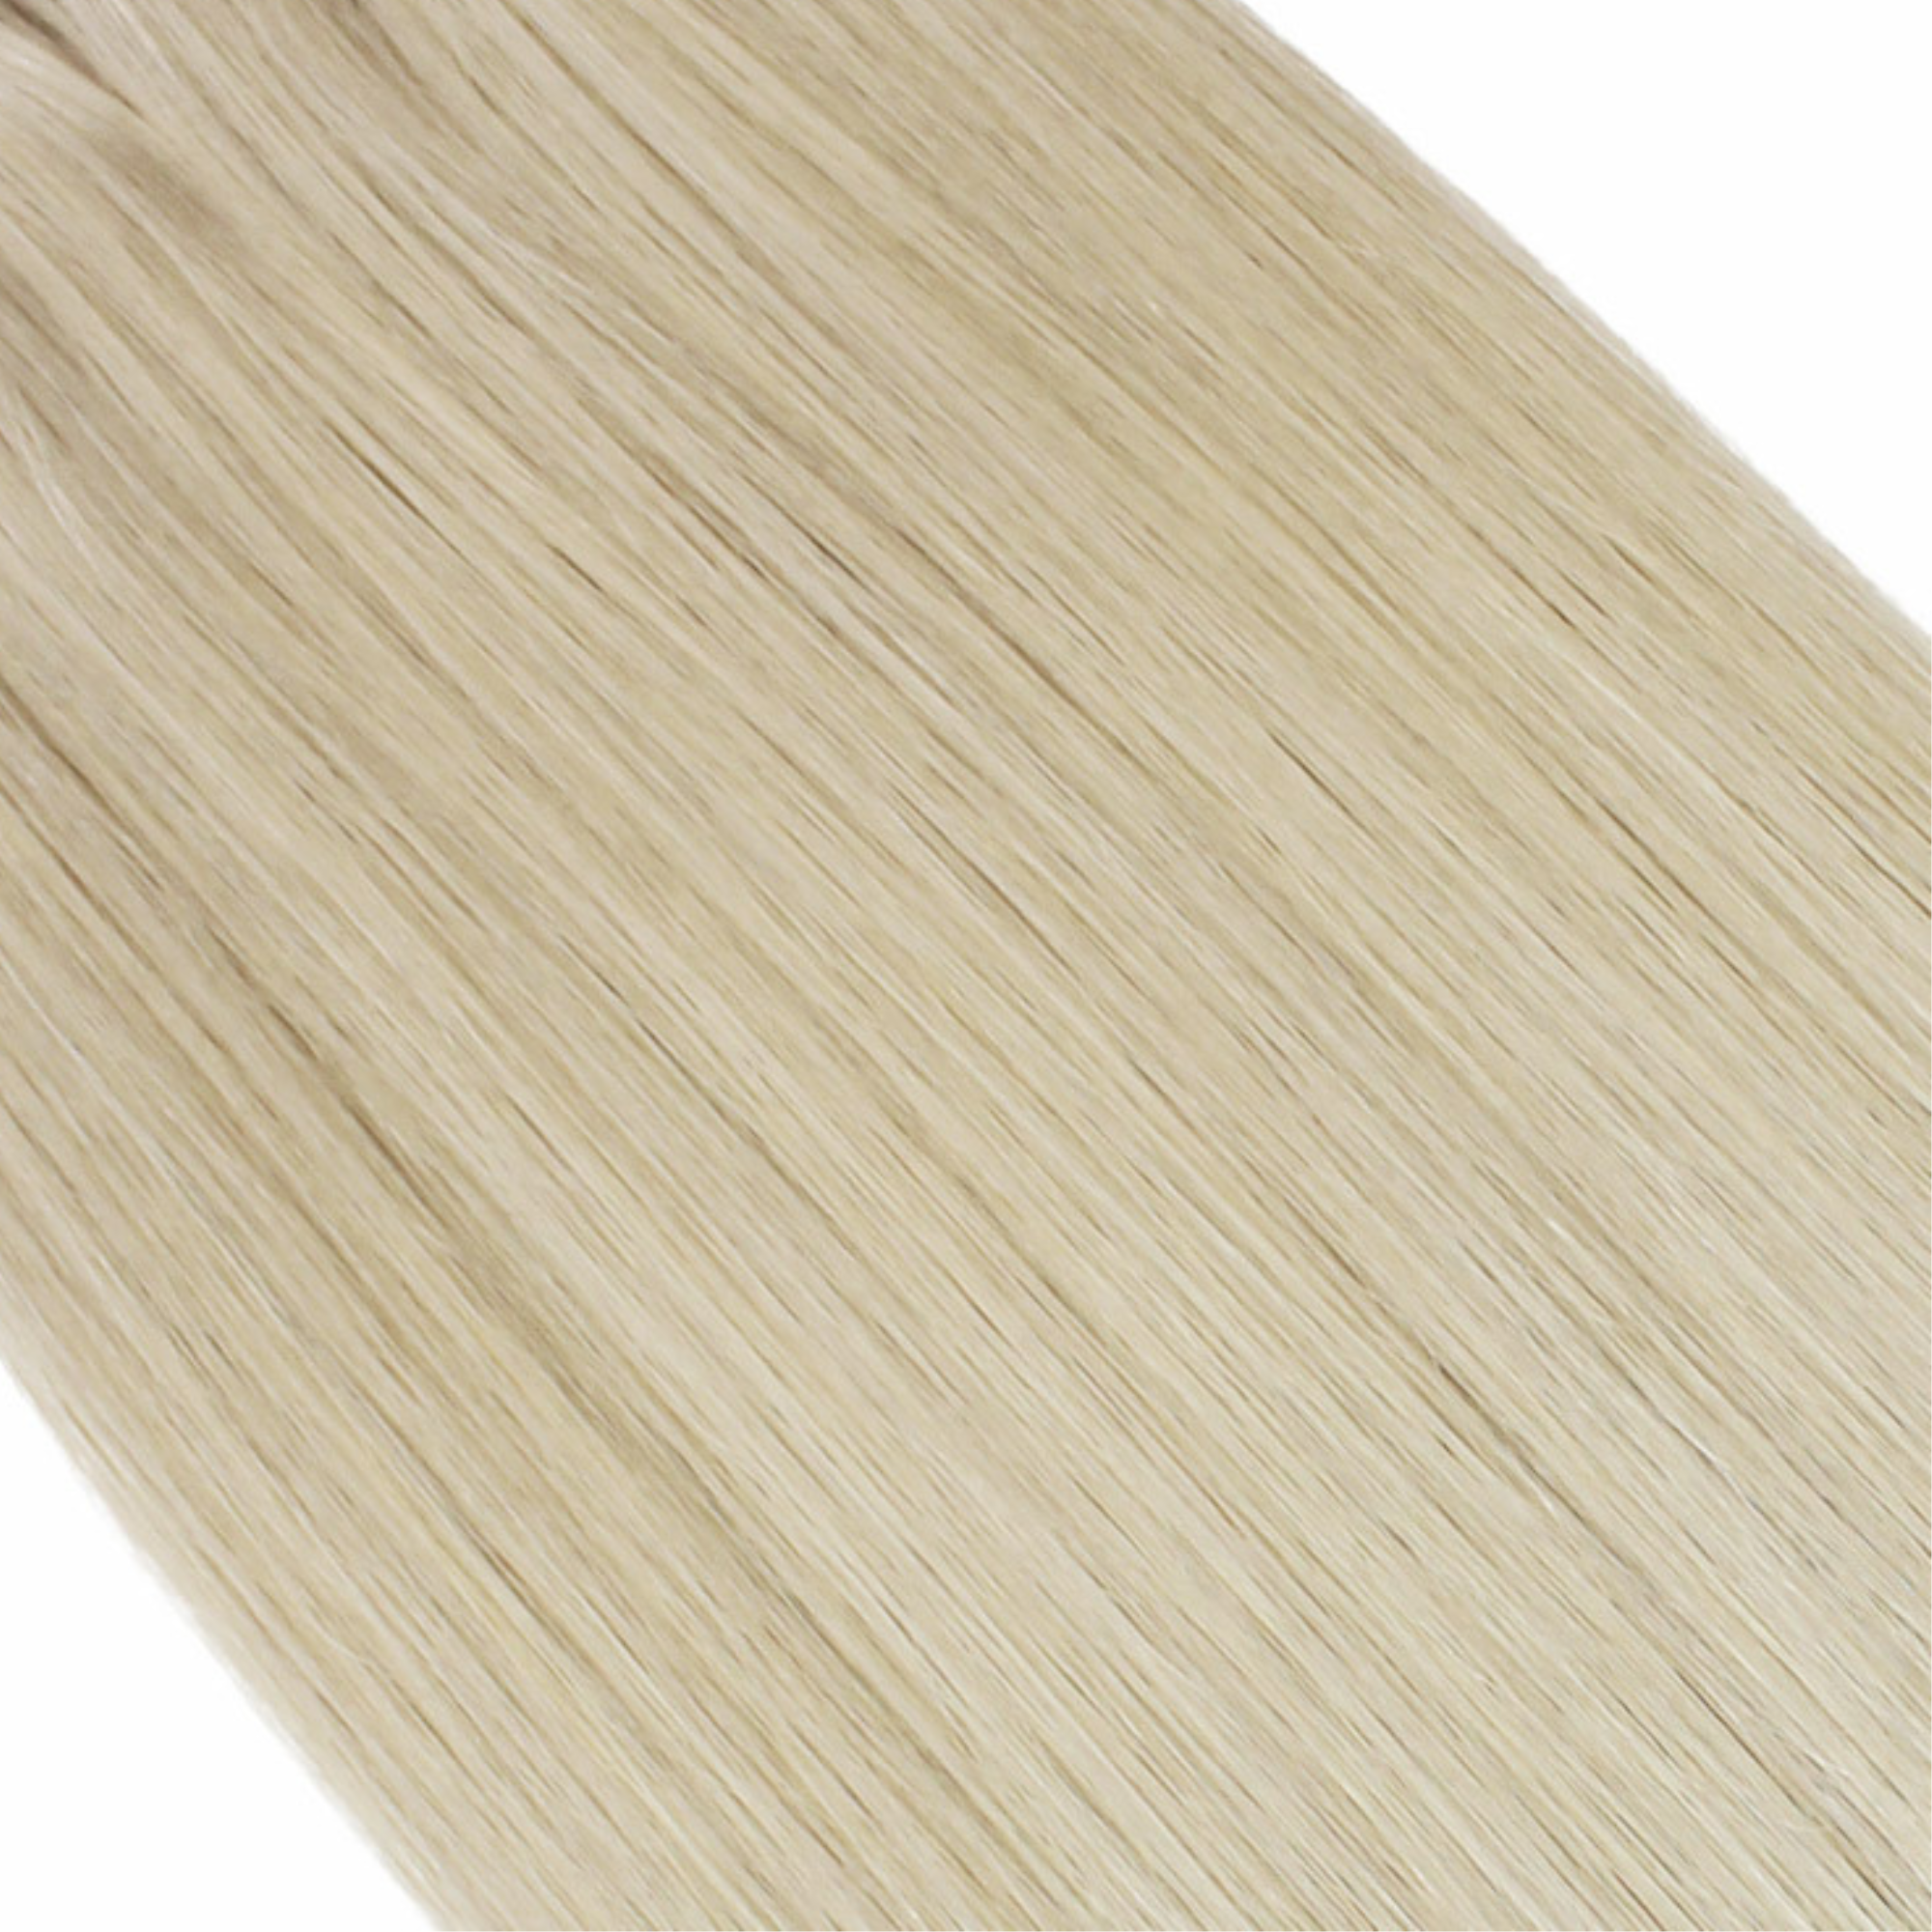 "hair rehab london 18" tape hair extensions shade swatch titled ice blonde"